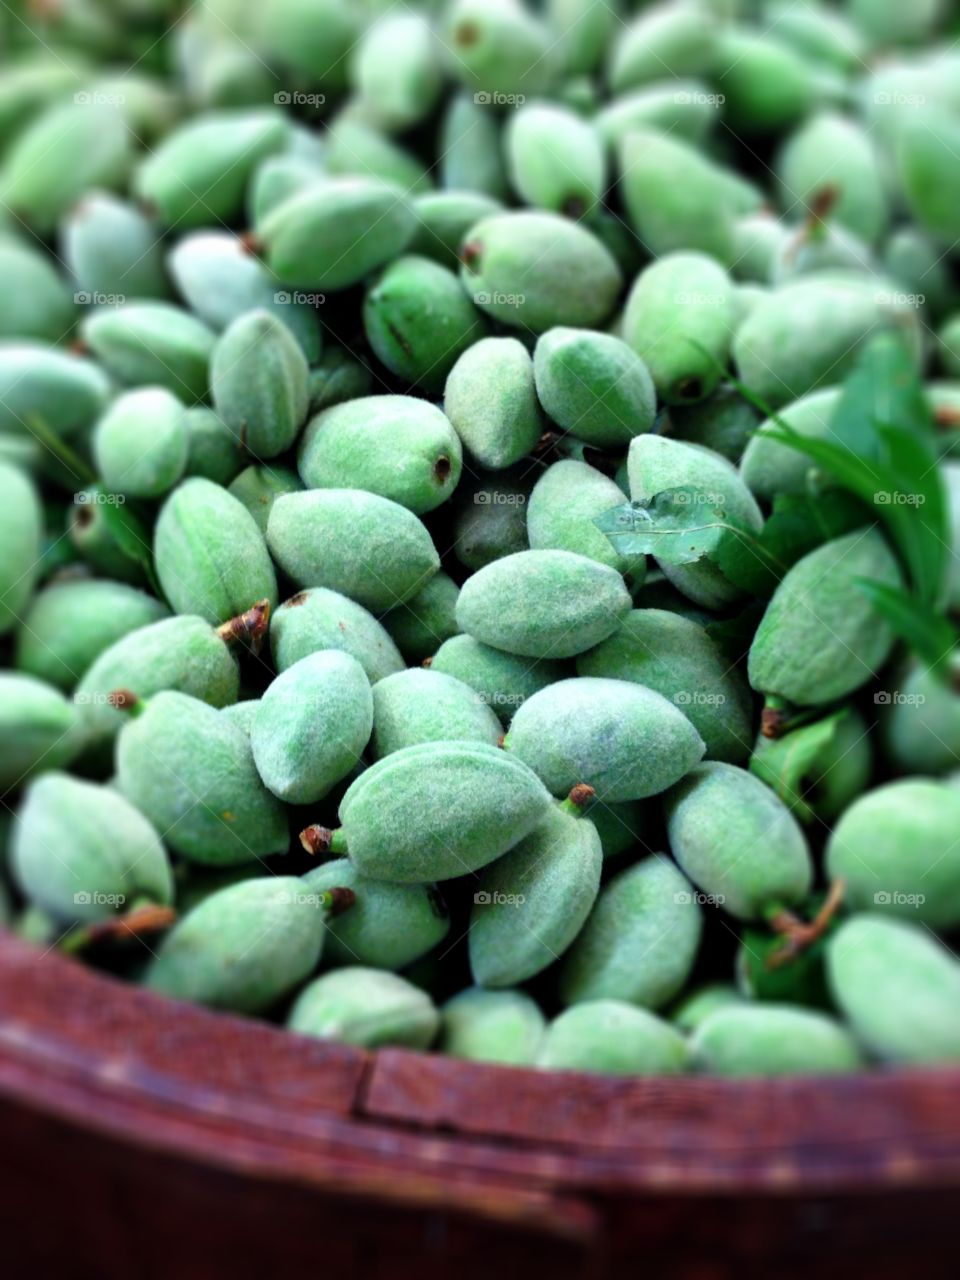 While raw almonds. Fresh green almonds in their shell. Raw almonds at a local market.